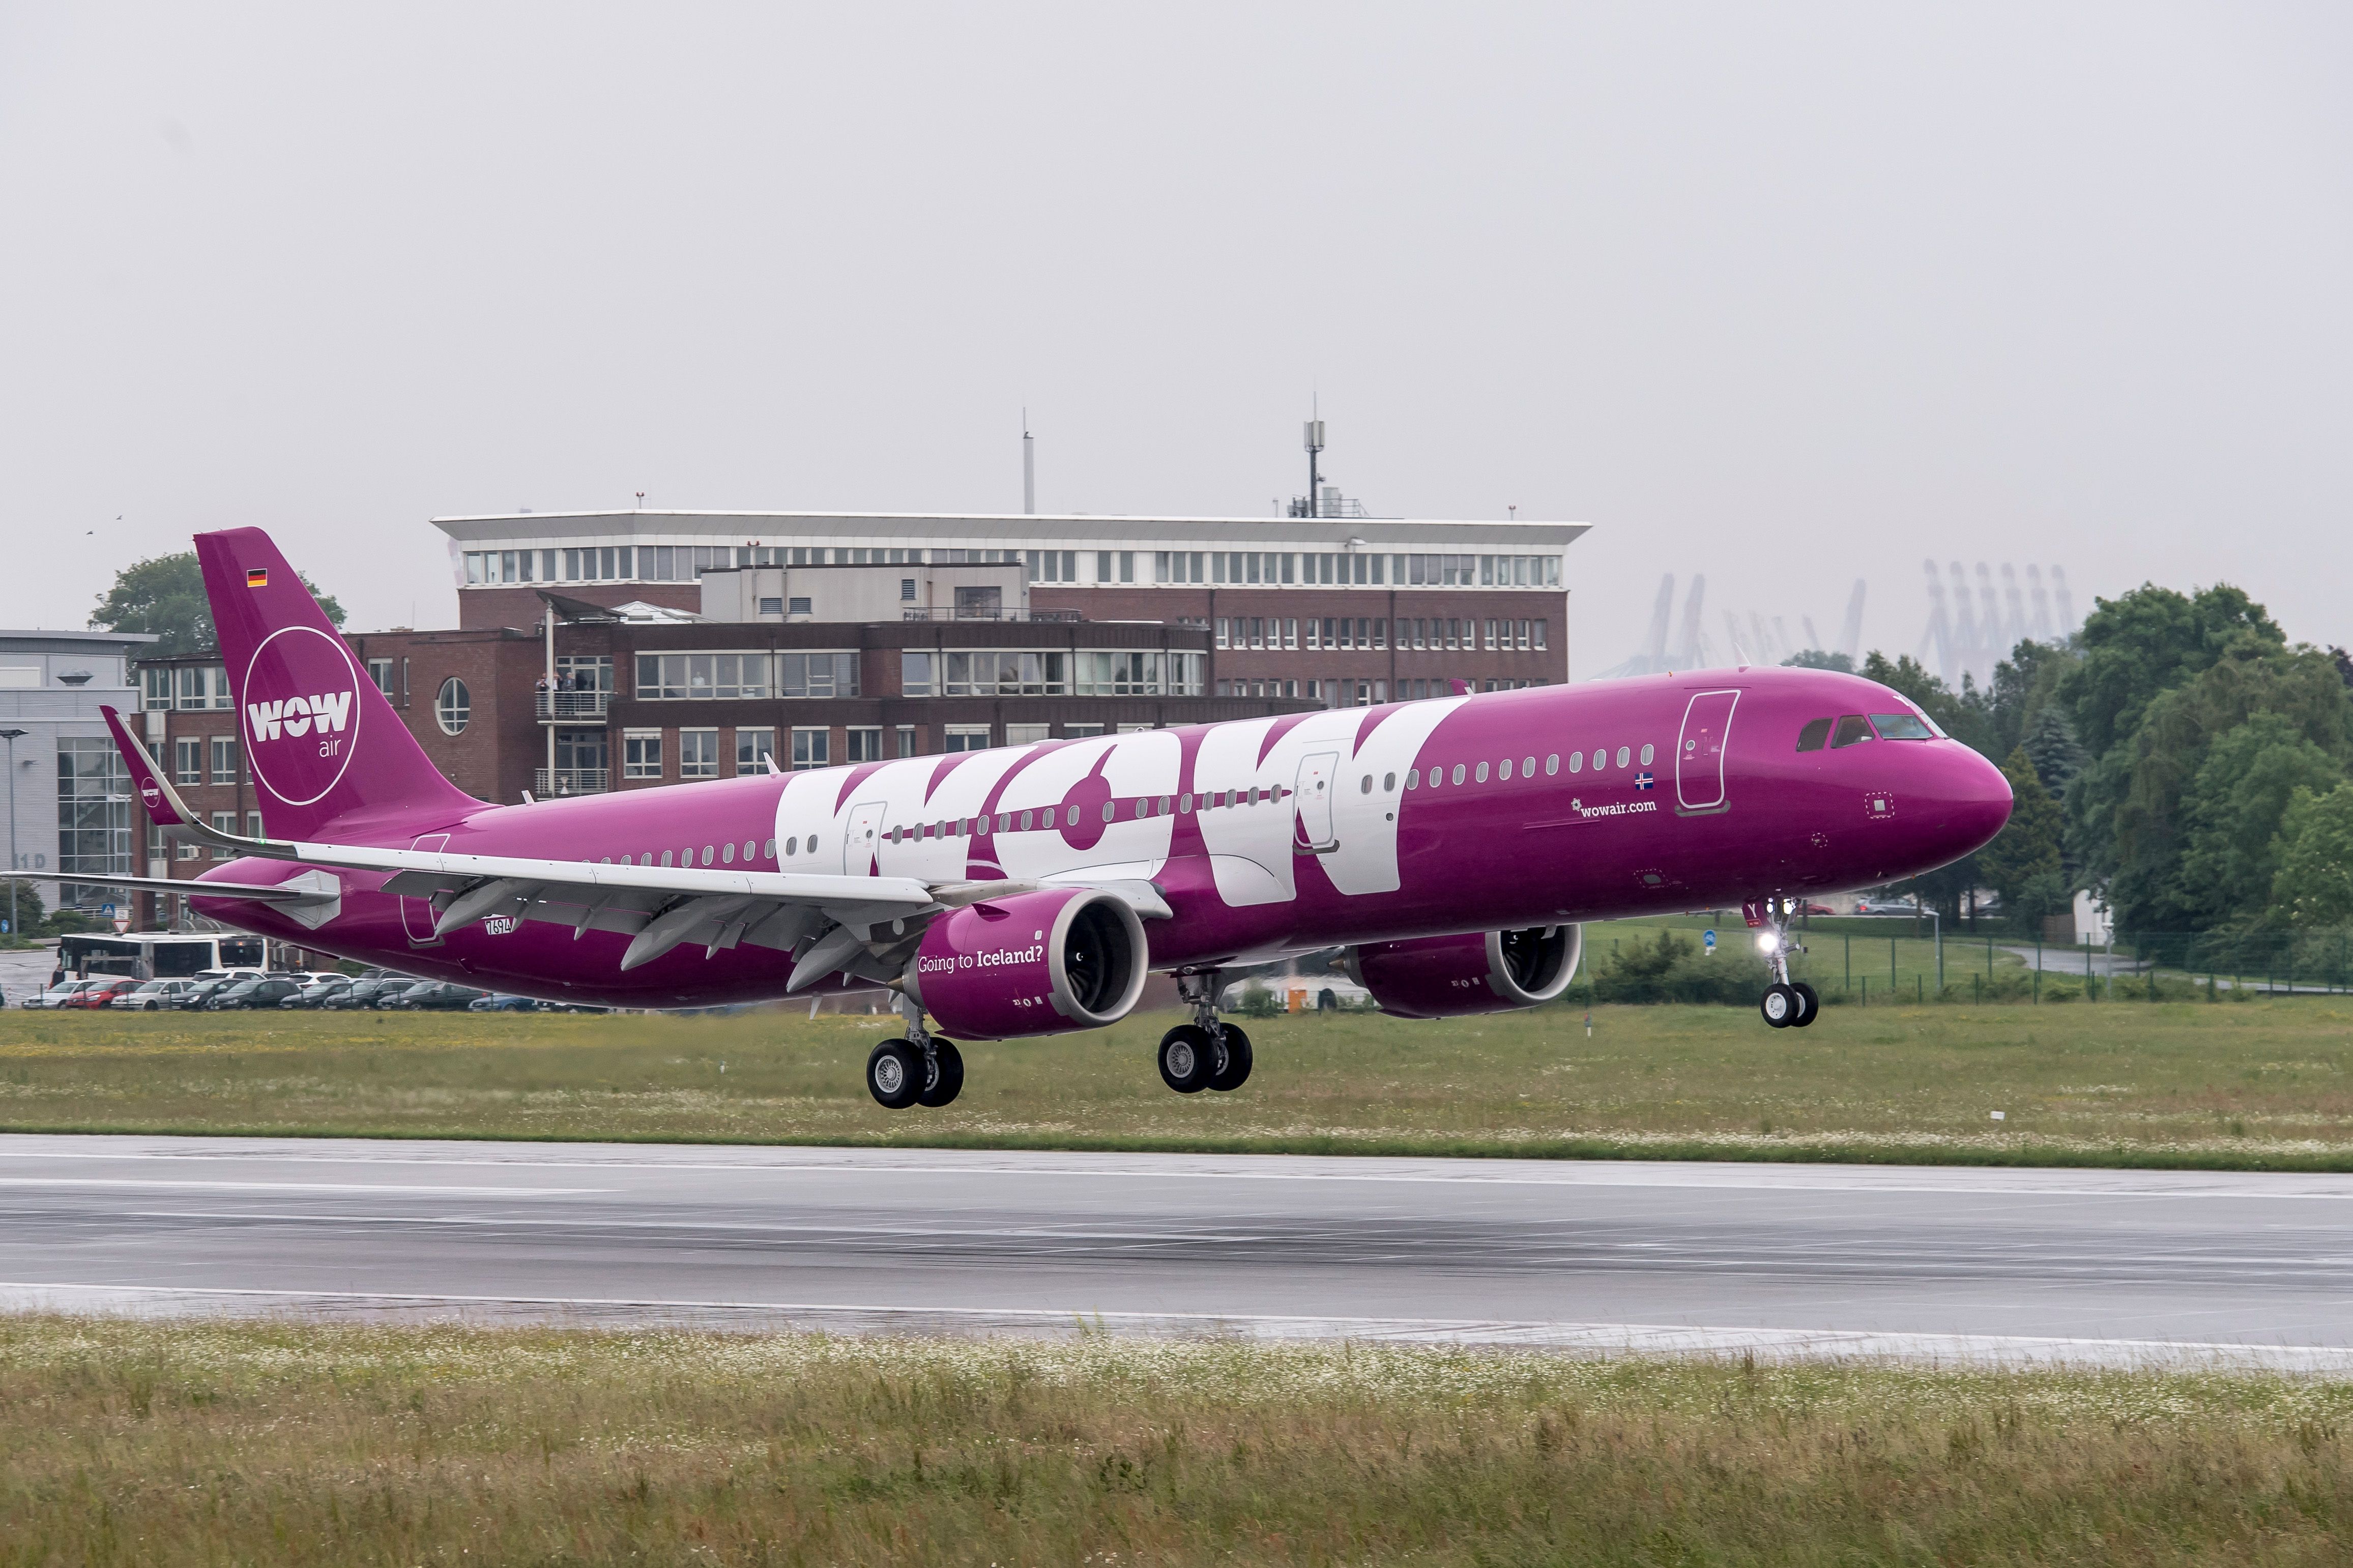 Wow Air to end LAX-to-Reykjavik route - L.A. Business First